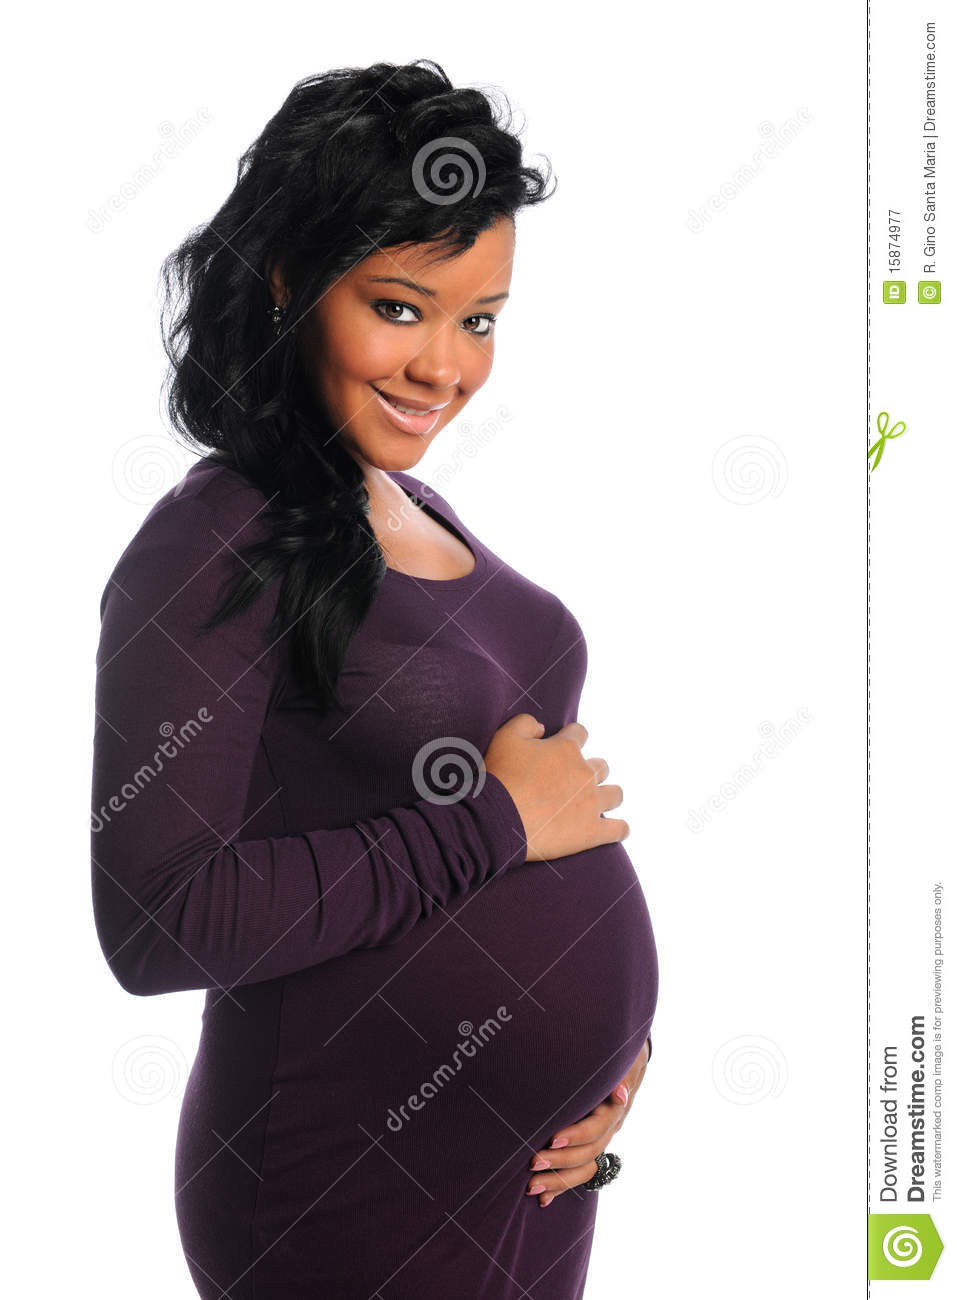 Pregnant African American Woman Royalty Free Stock Photography   Image